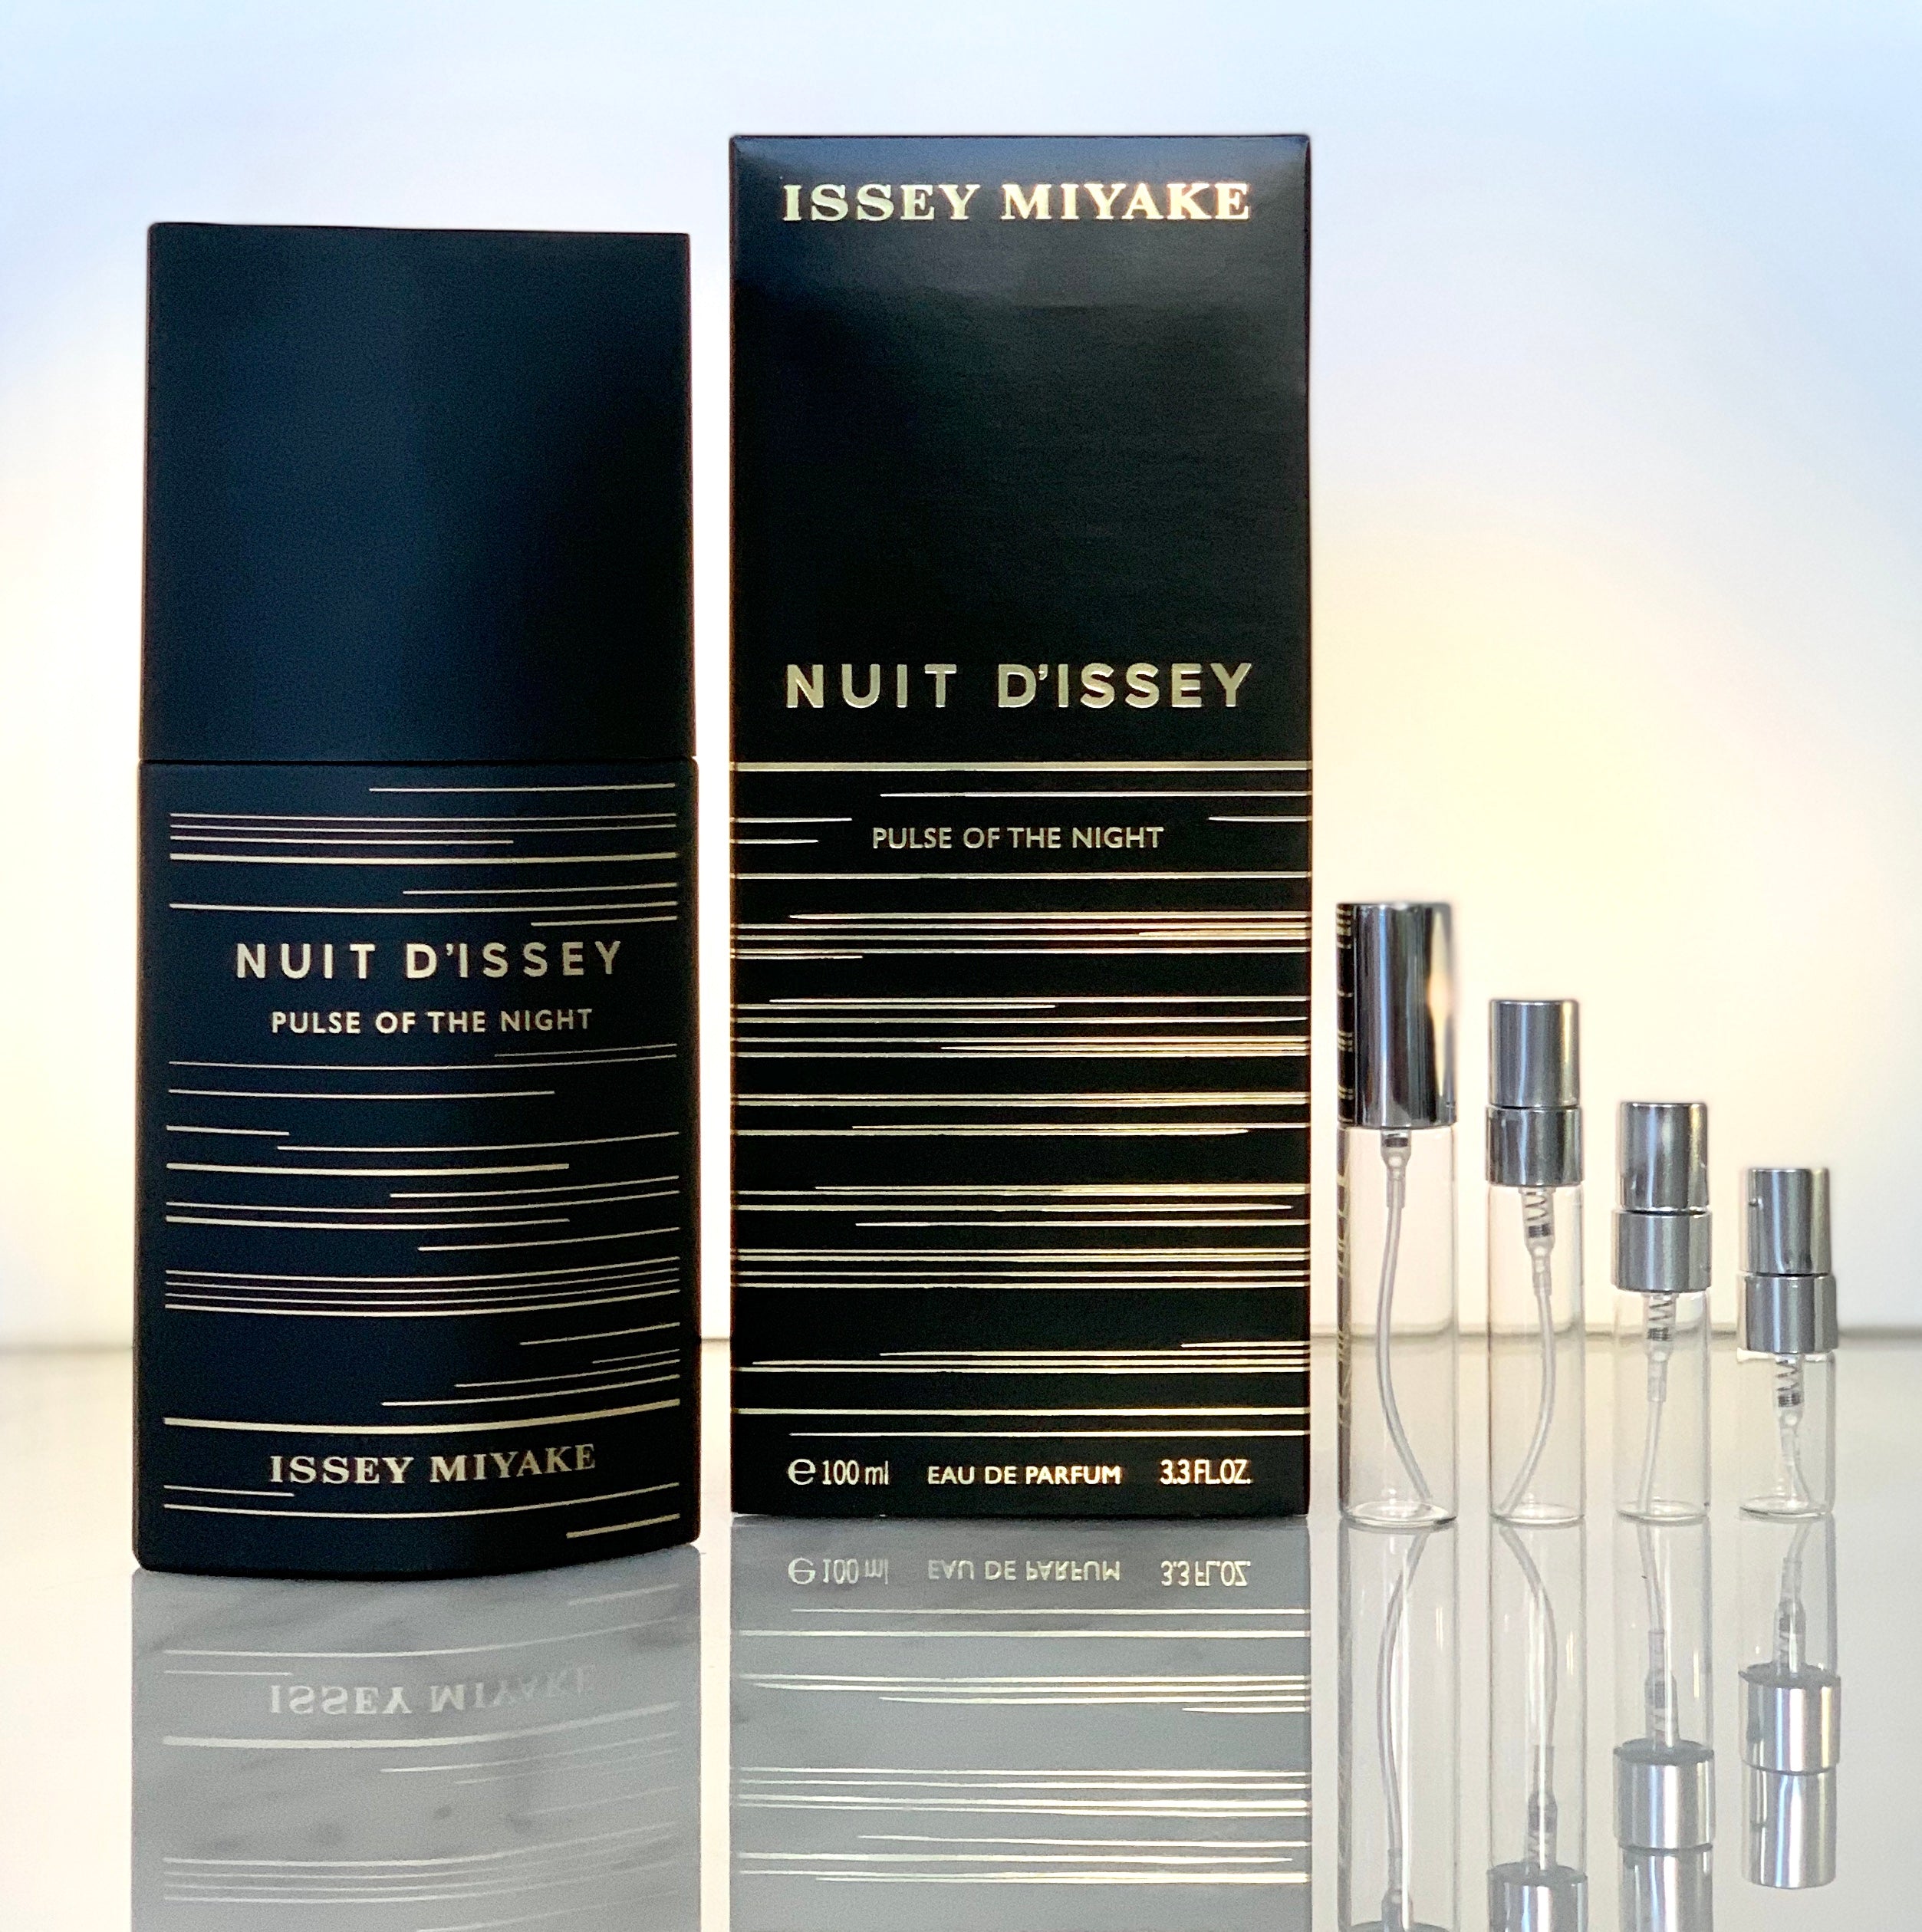 Nuit D'Issey Pulse of the Night